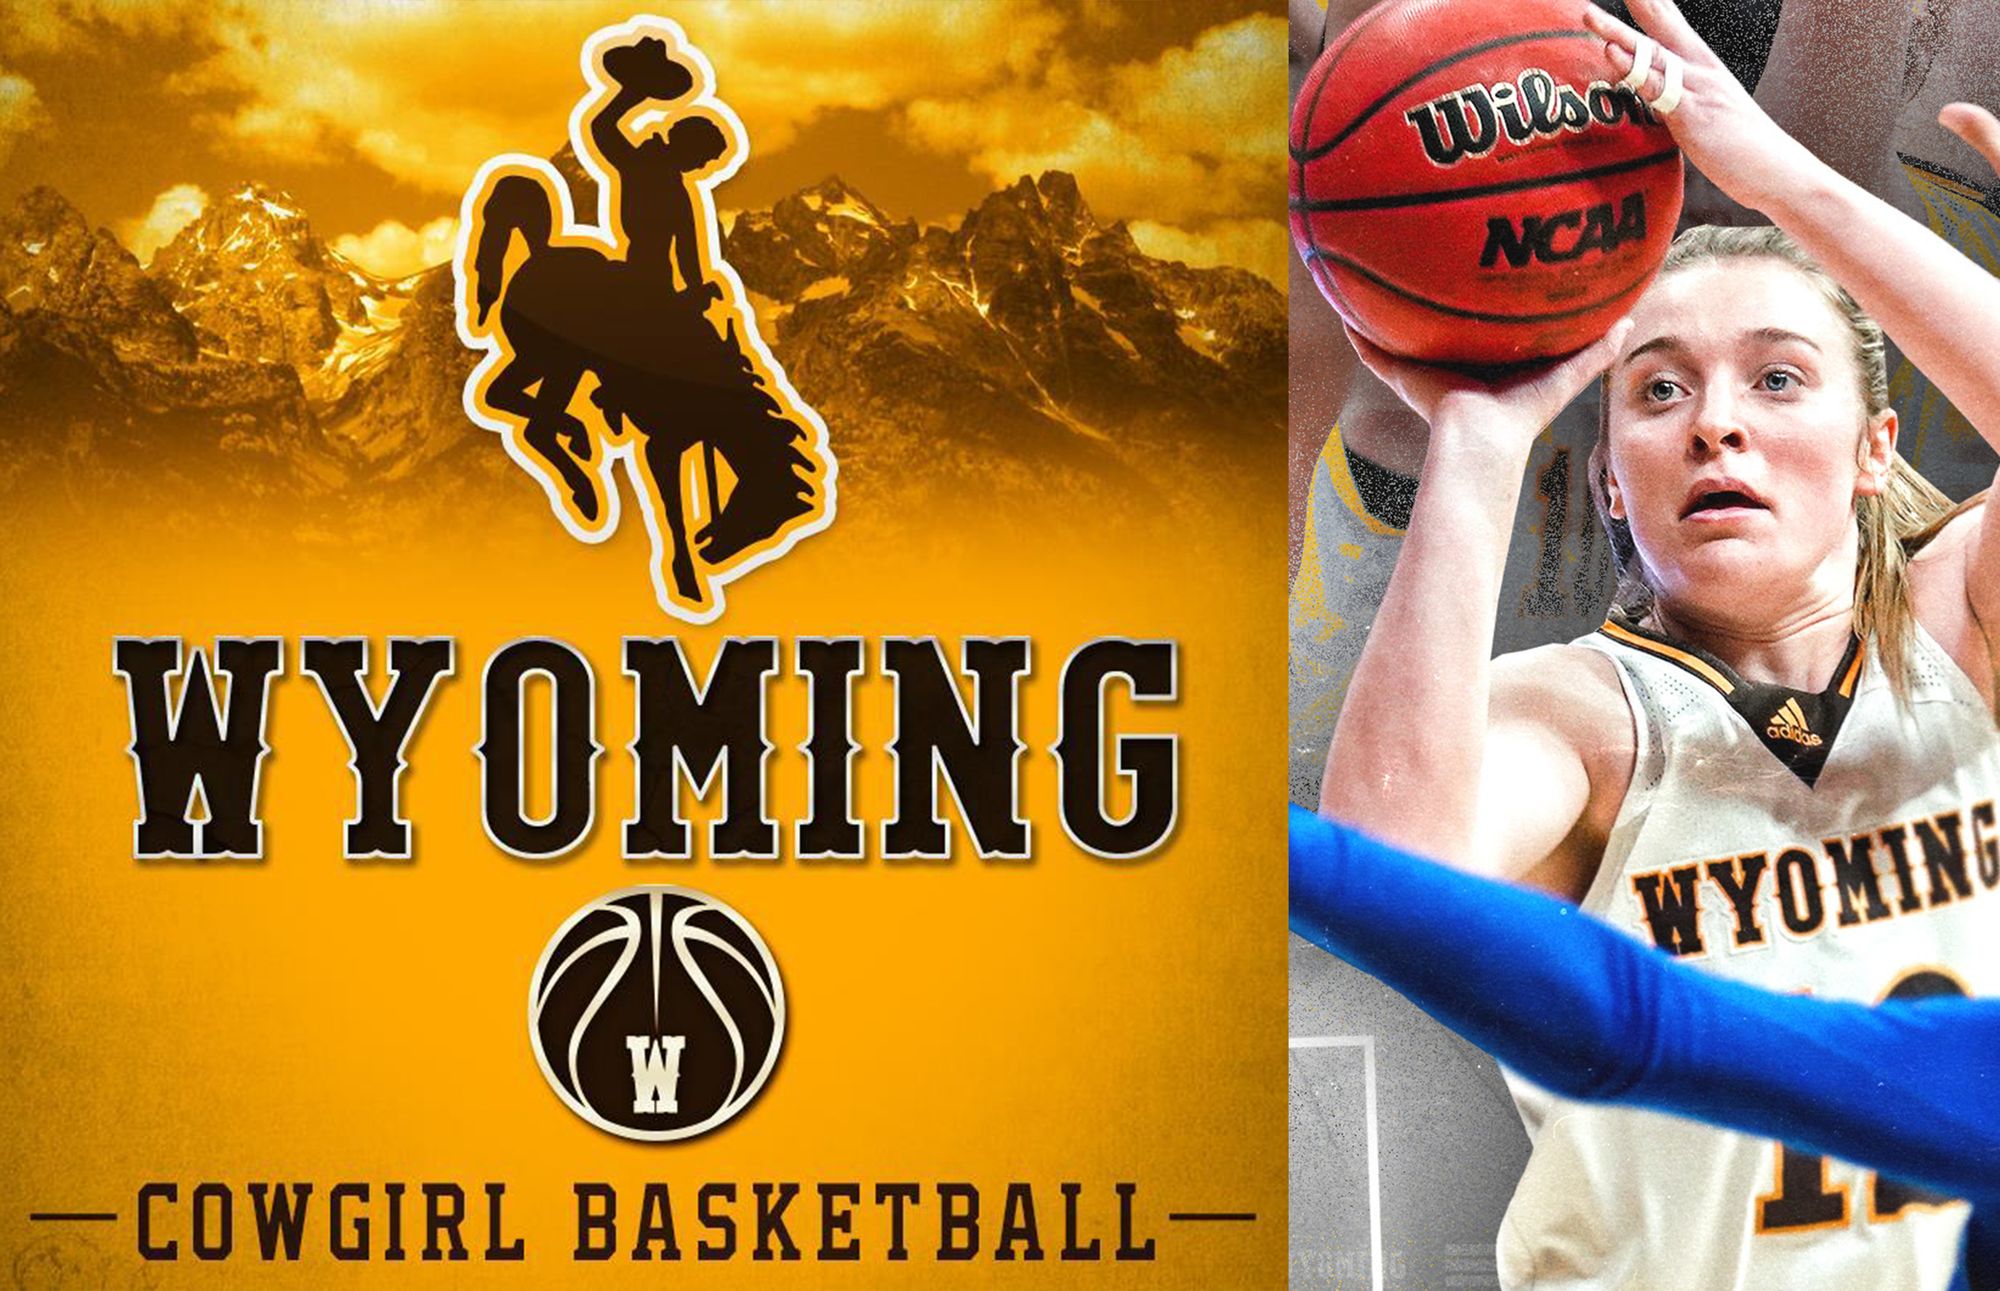 Sweet 16 - Lets Go Wyoming Cowgirls!!